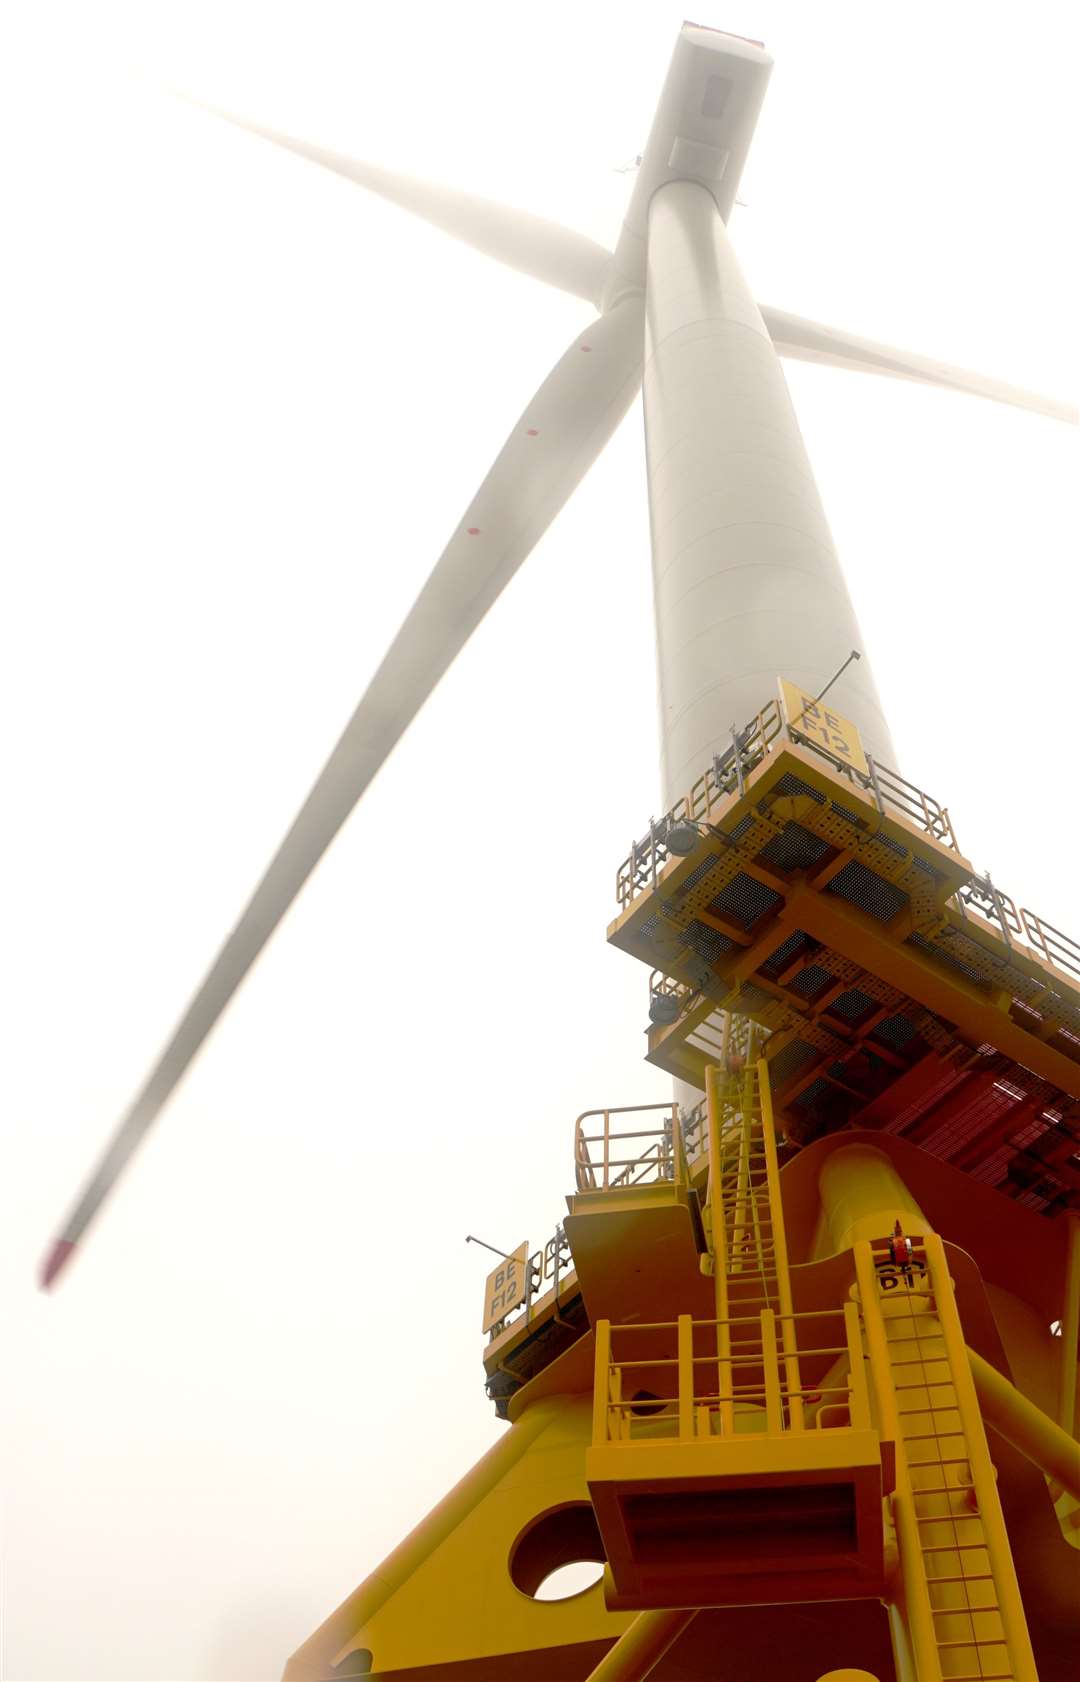 The Beatrice Offshore Windfarm has created funding opportunities that could be exploited more in Caithness. Picture: DGS